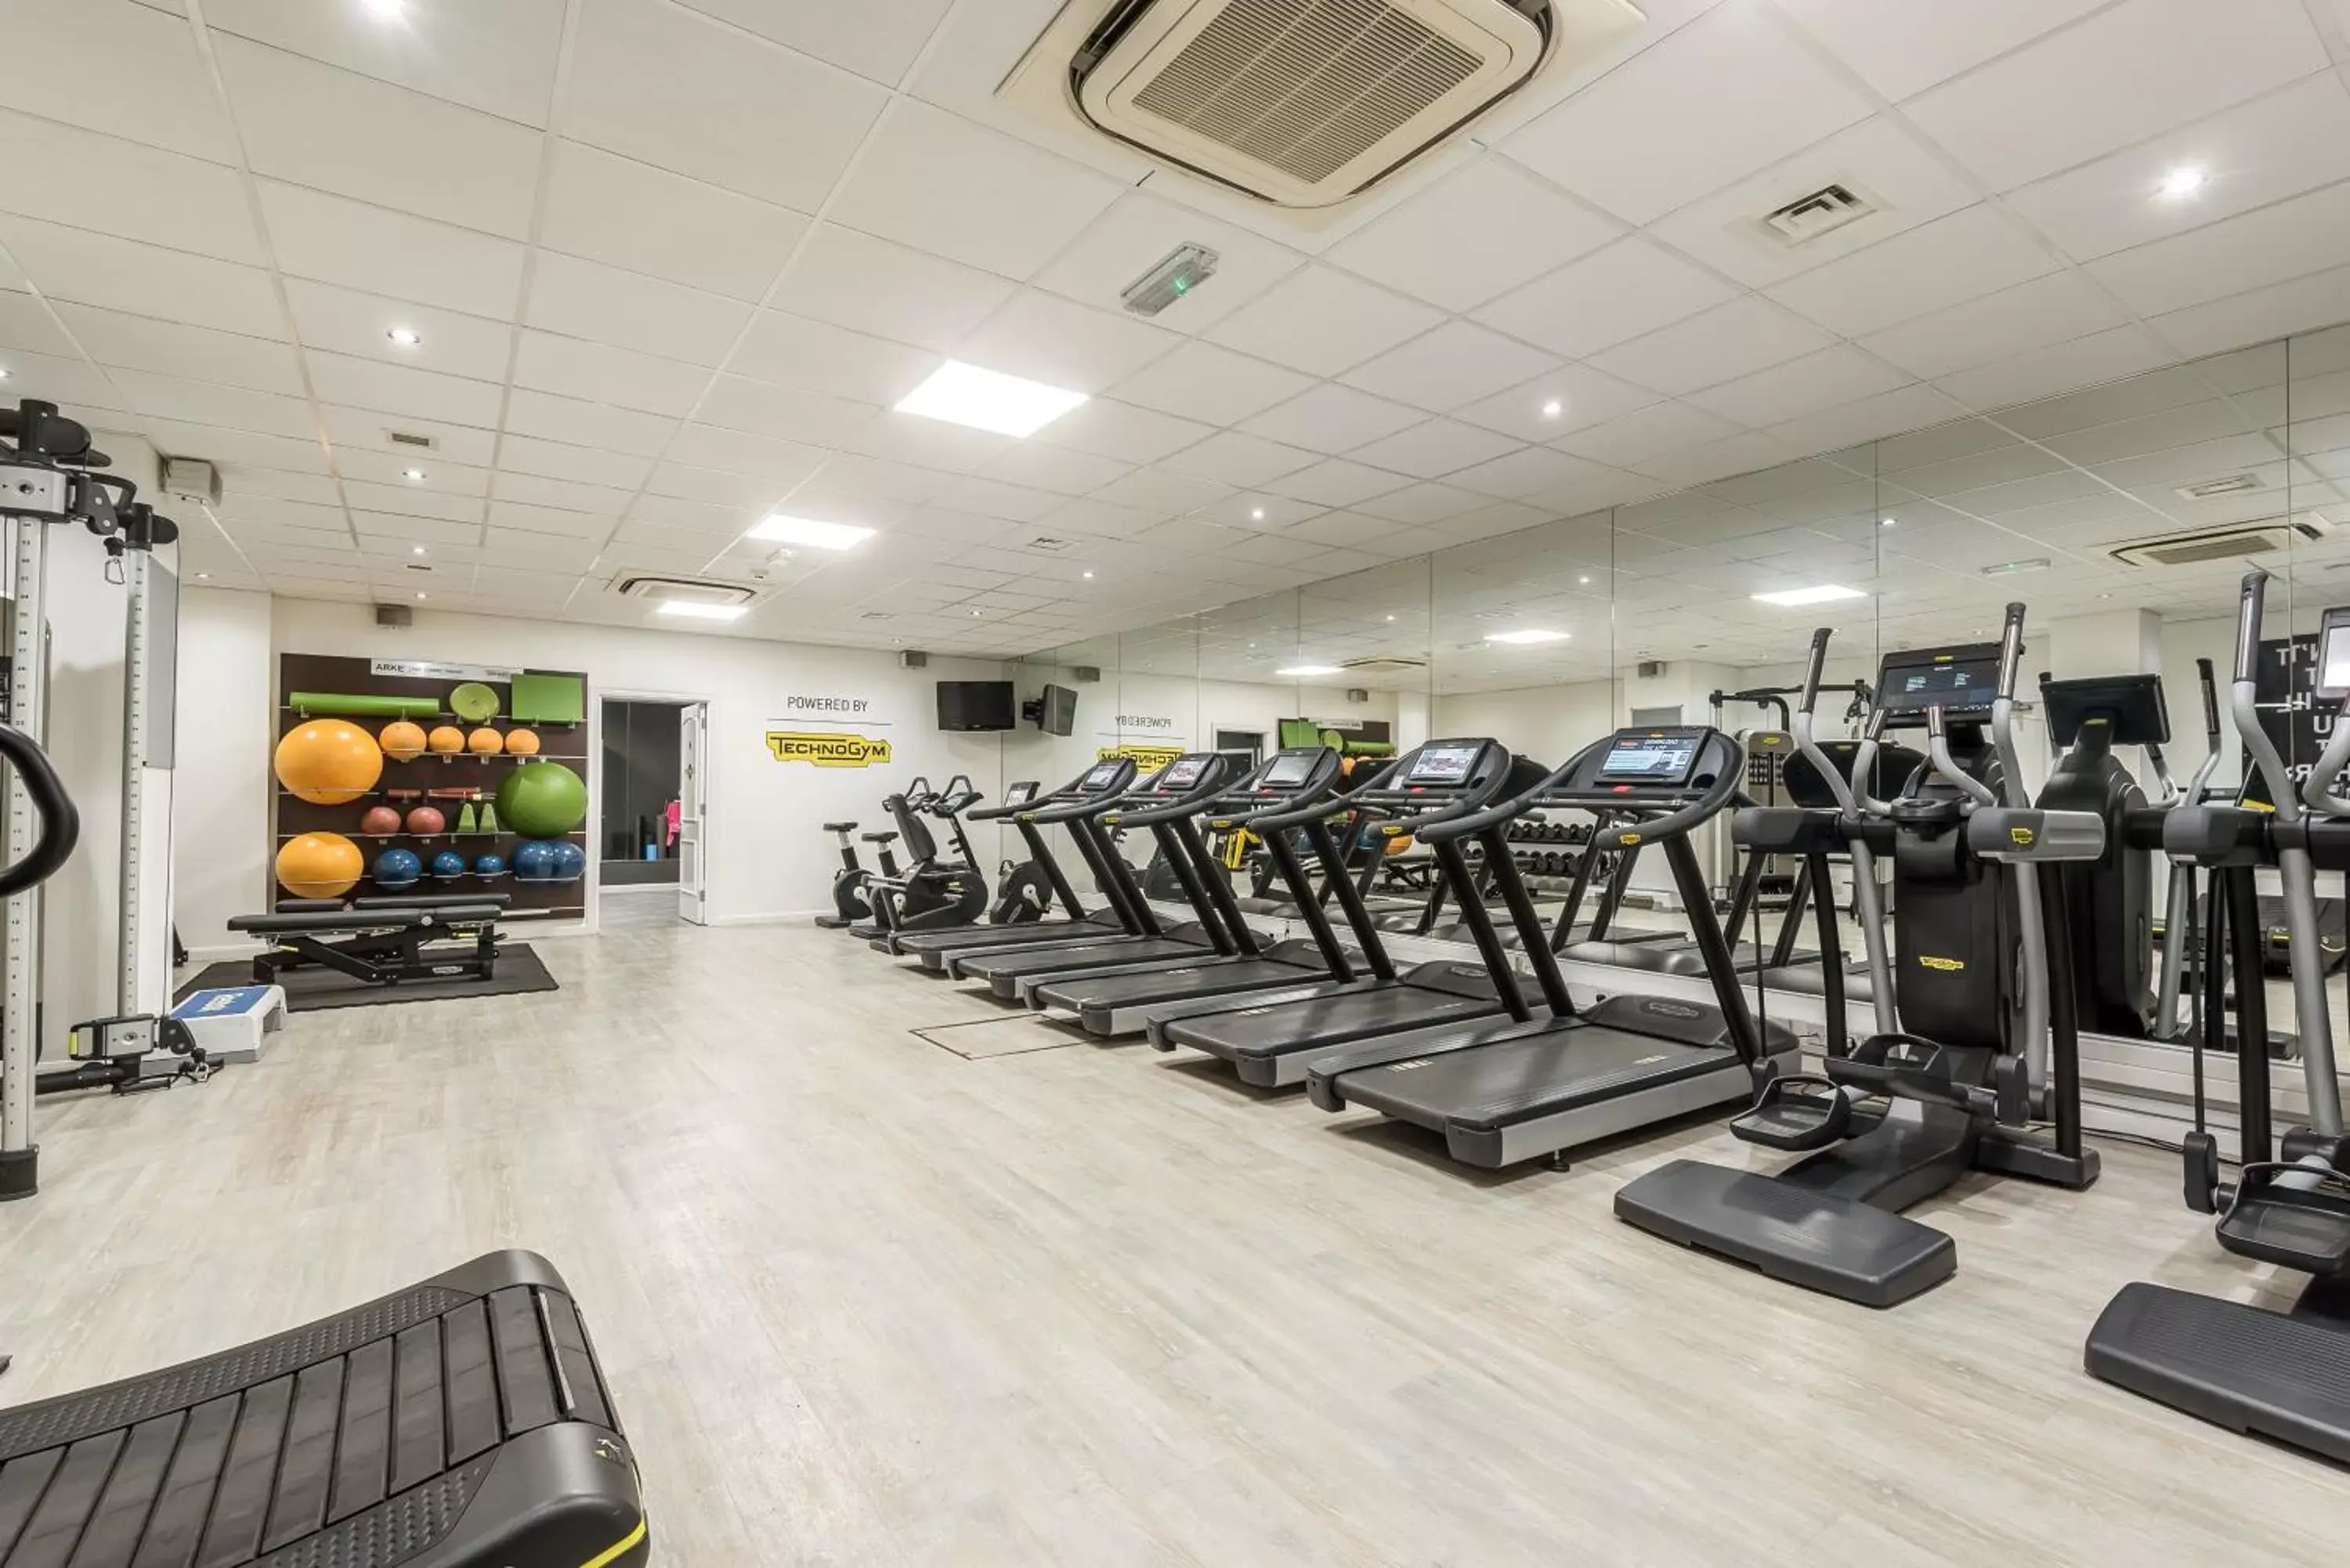 Fitness centre/facilities, Fitness Center/Facilities in Coppid Beech